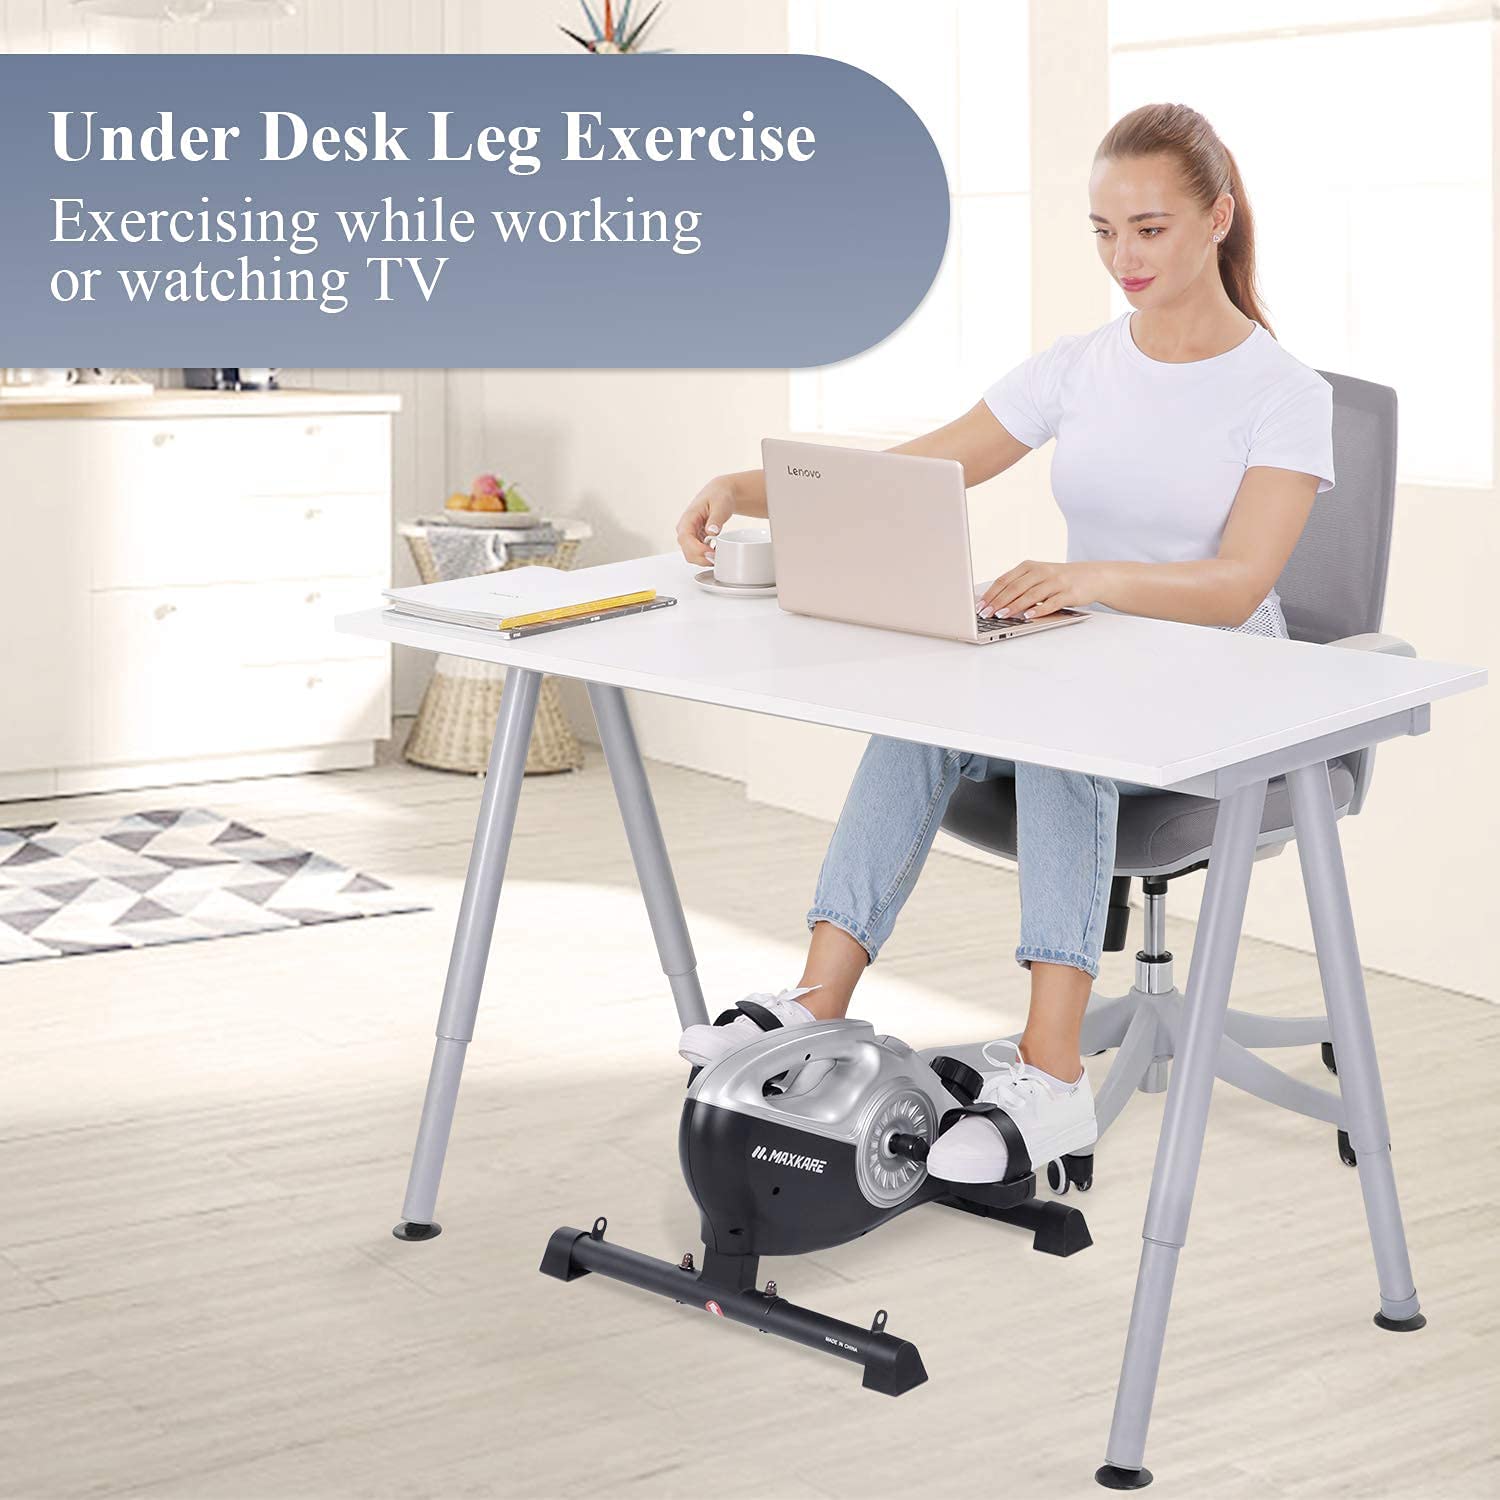 Load image into Gallery viewer, Under Desk Bike Pedal Exerciser 2 in 1 Stationary Magnetic Exercise Bike with LCD Monitor for Arm Leg Body Workout for Men and Women at Home and Office (Resistance Bands Included) - NAIPO
